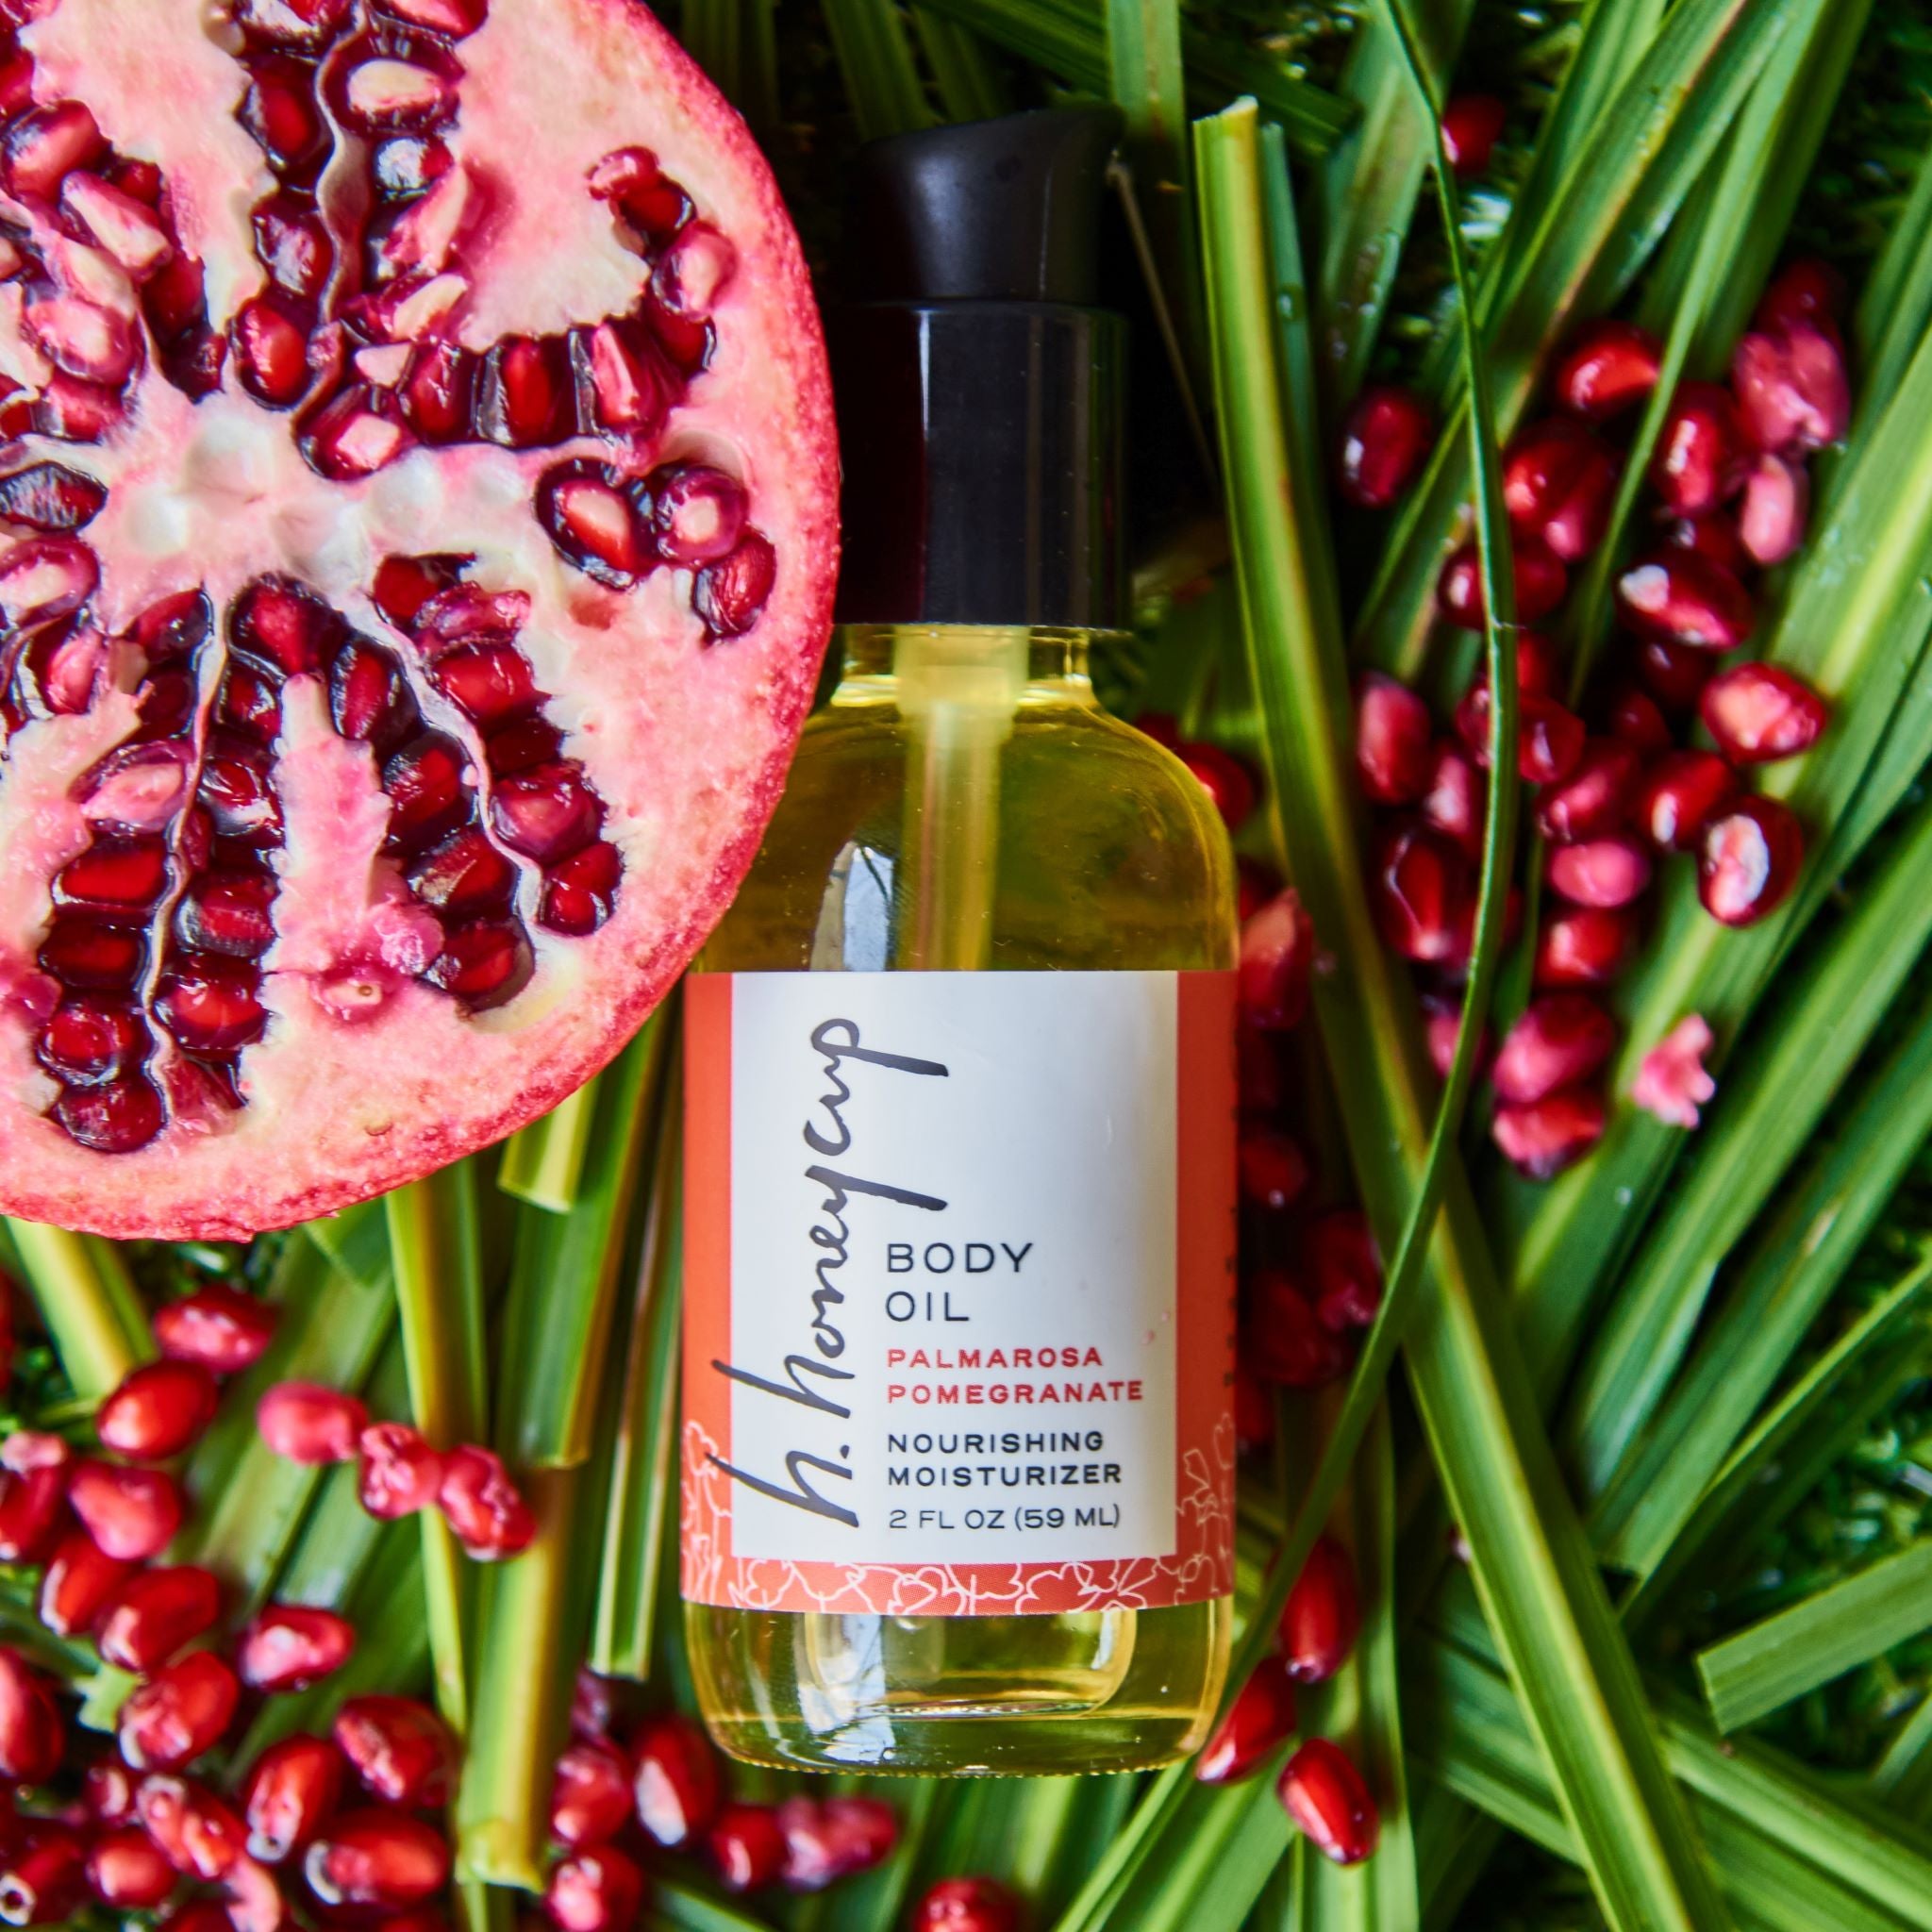 Body oil surrounded by real pomegranates and palmarosa ingredients